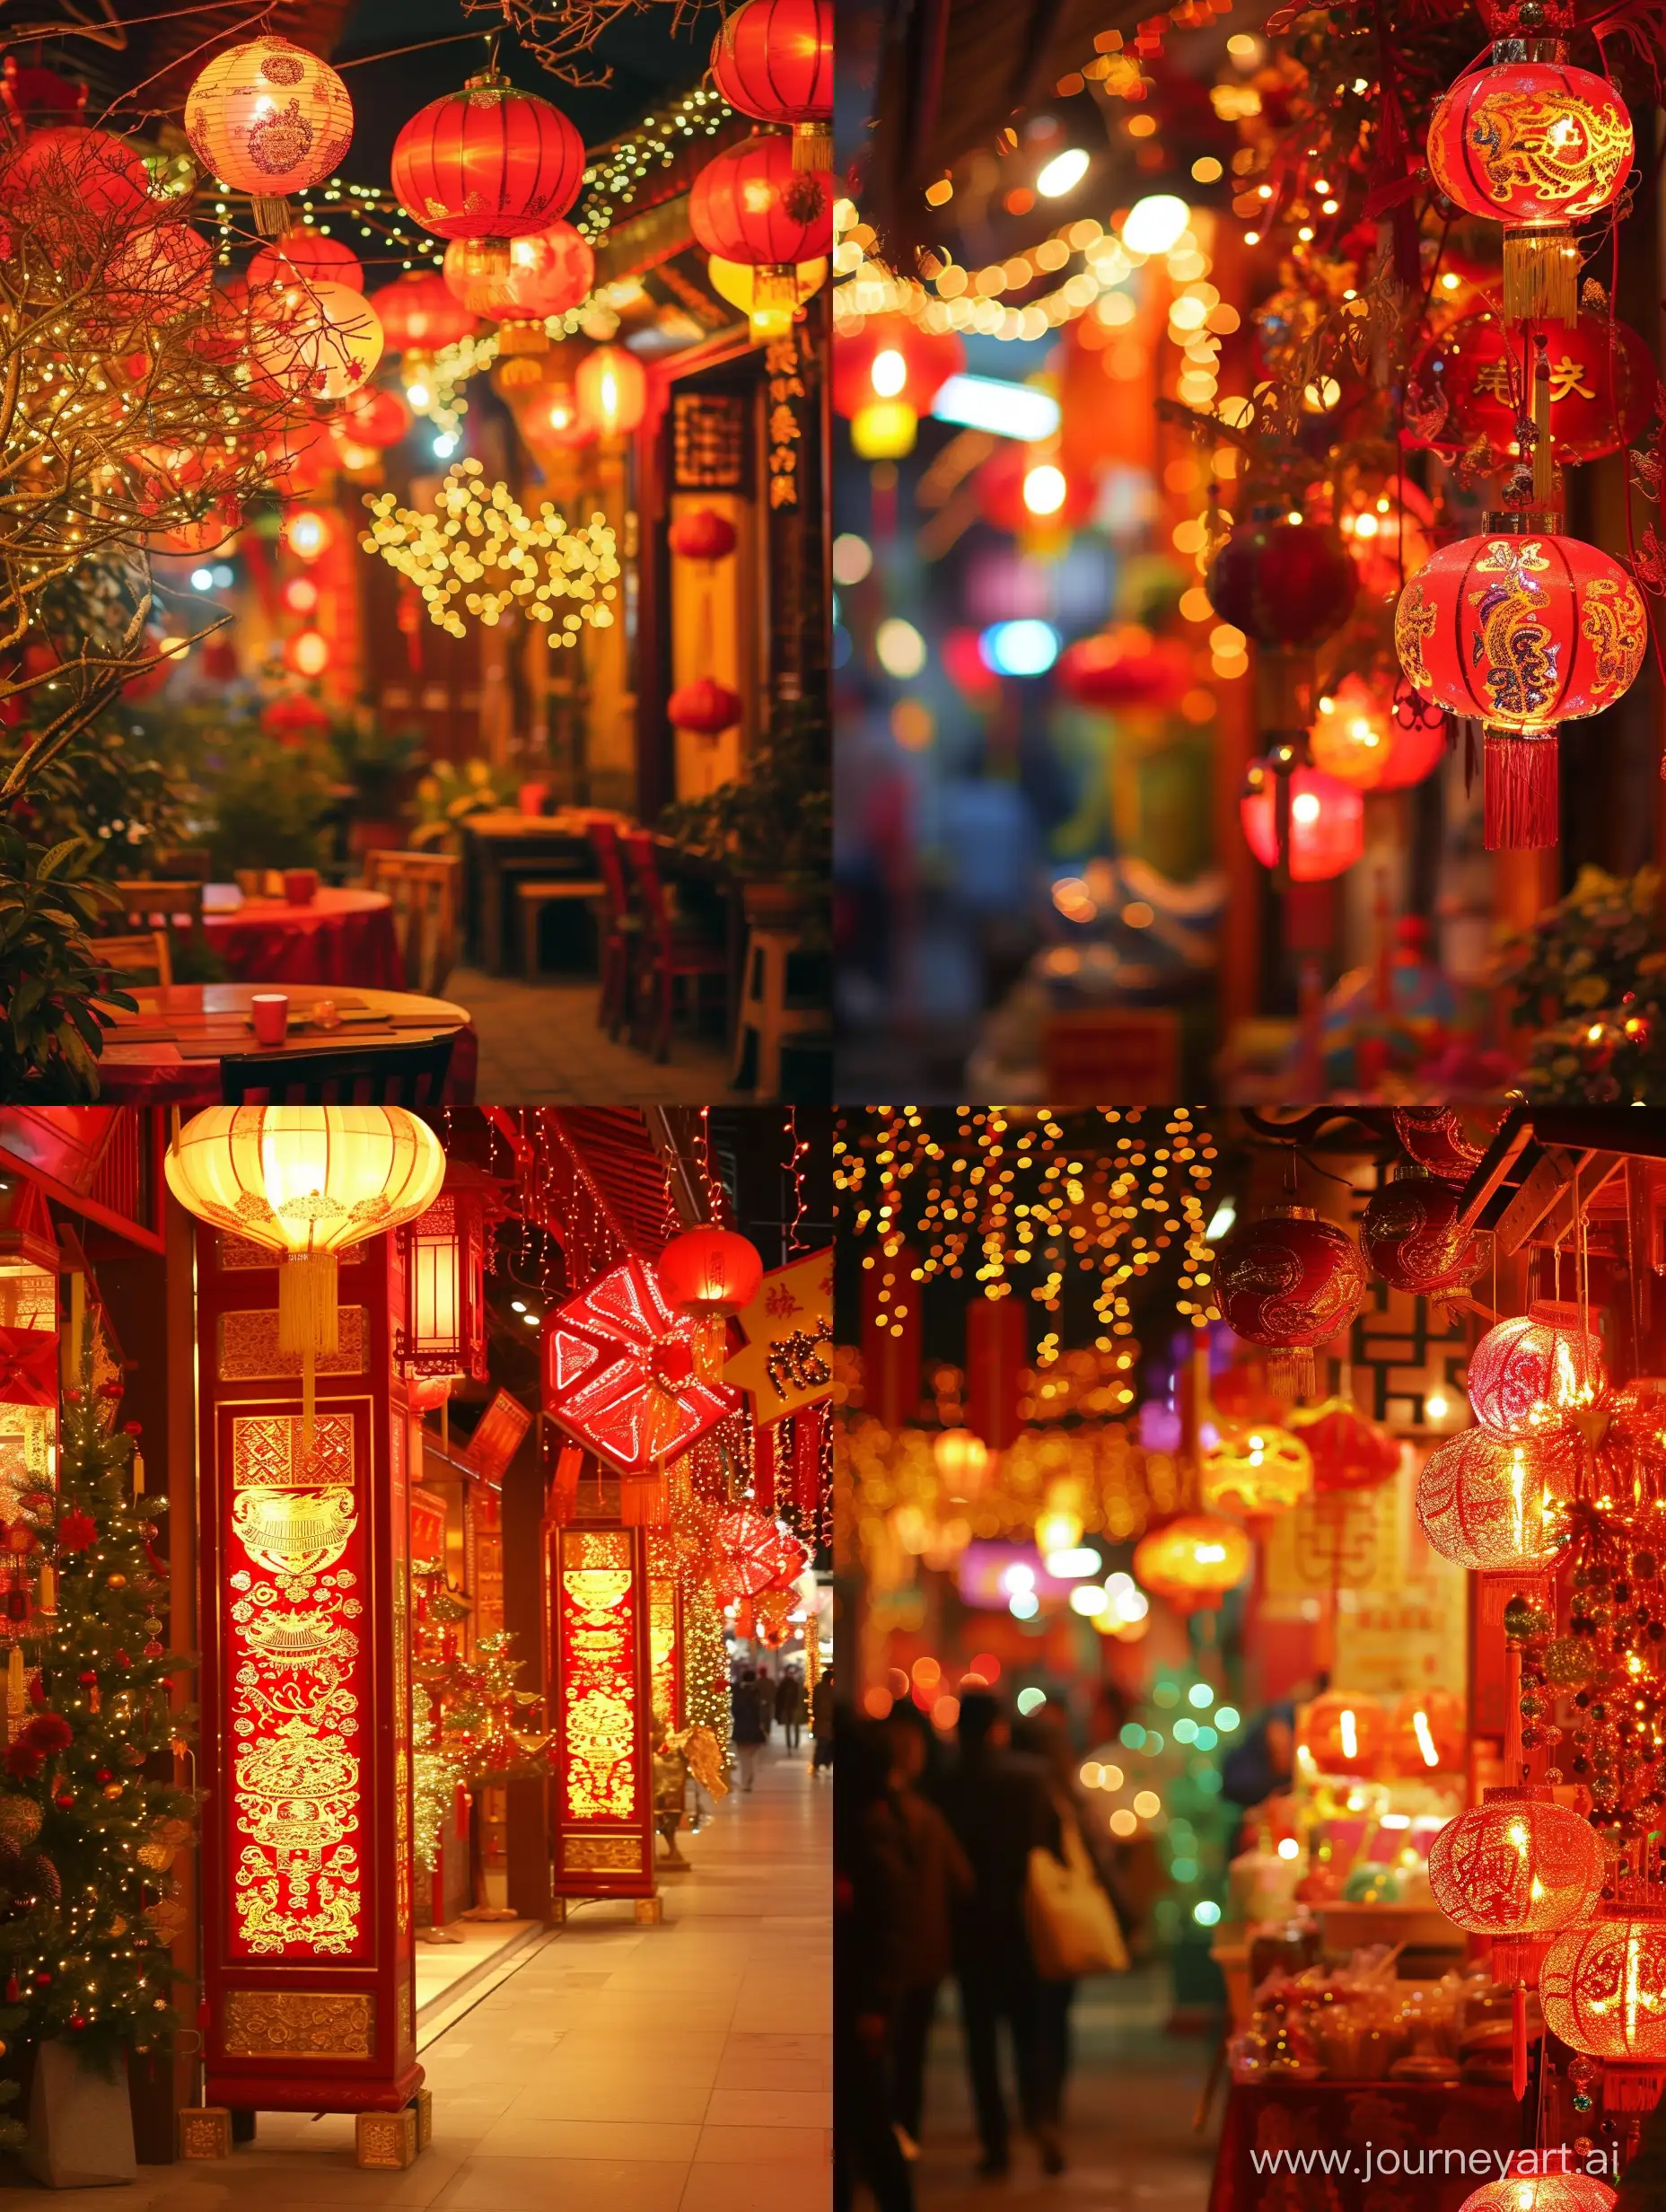 Chinese New Year, a lively and festive atmosphere, with decorations and bright lights.